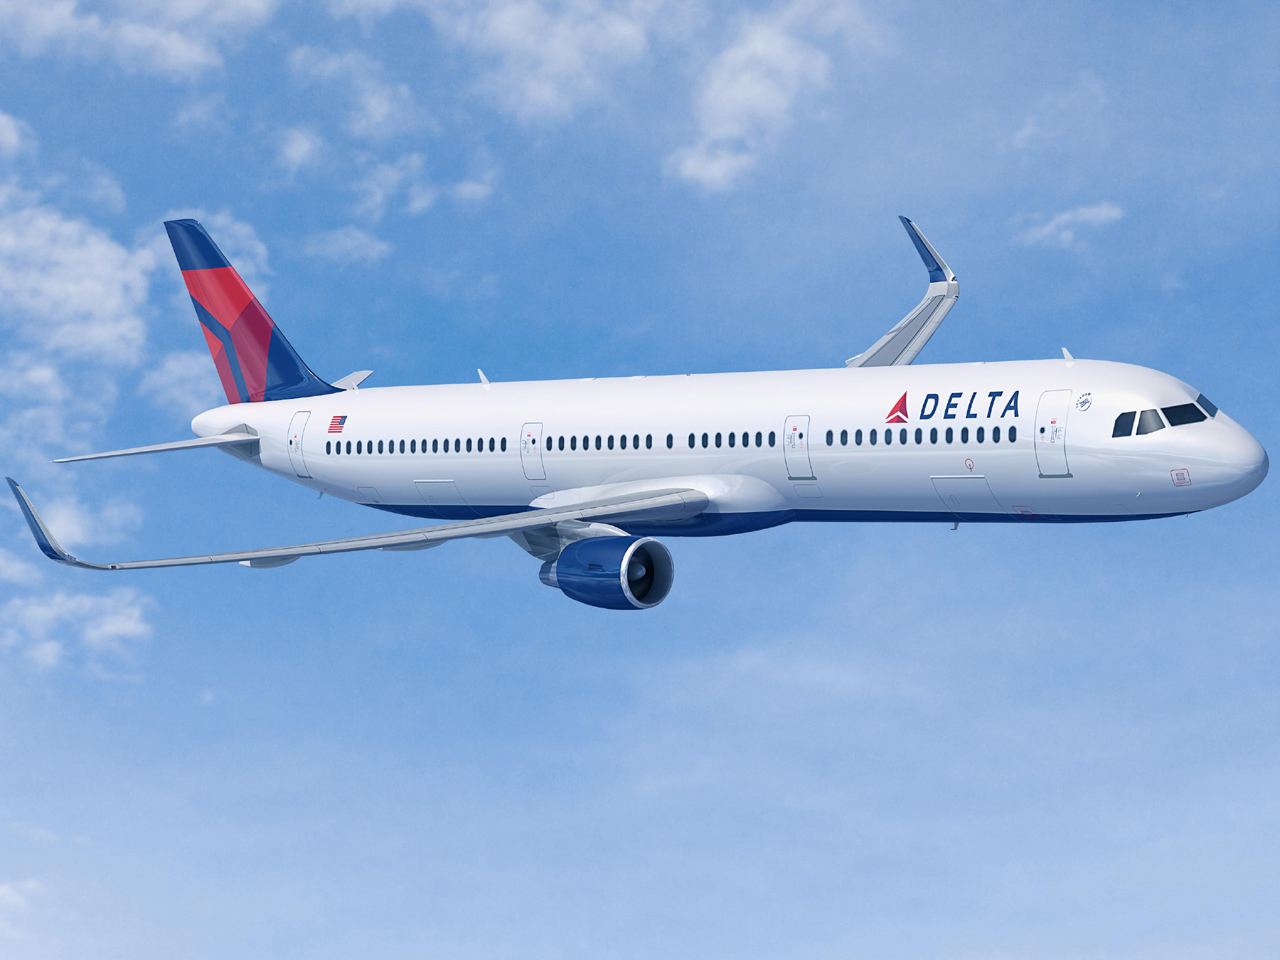 Delta orders 15 new Airbus planes - CBS News